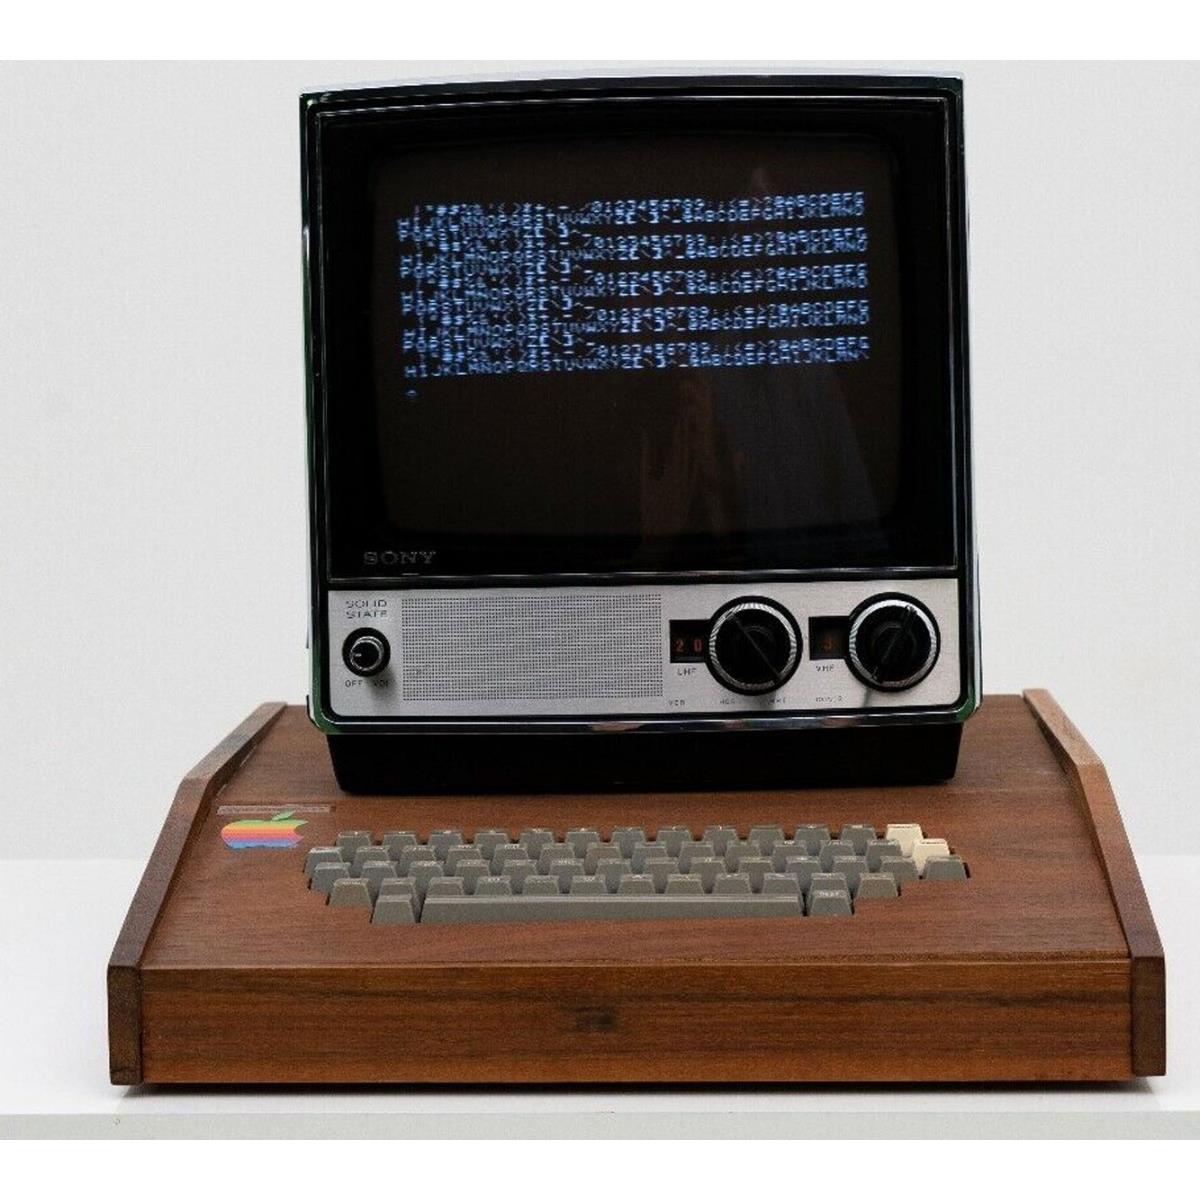 Ultra-Rare Apple 1 Built By Wozniak And Jobs Hits Auction For A 